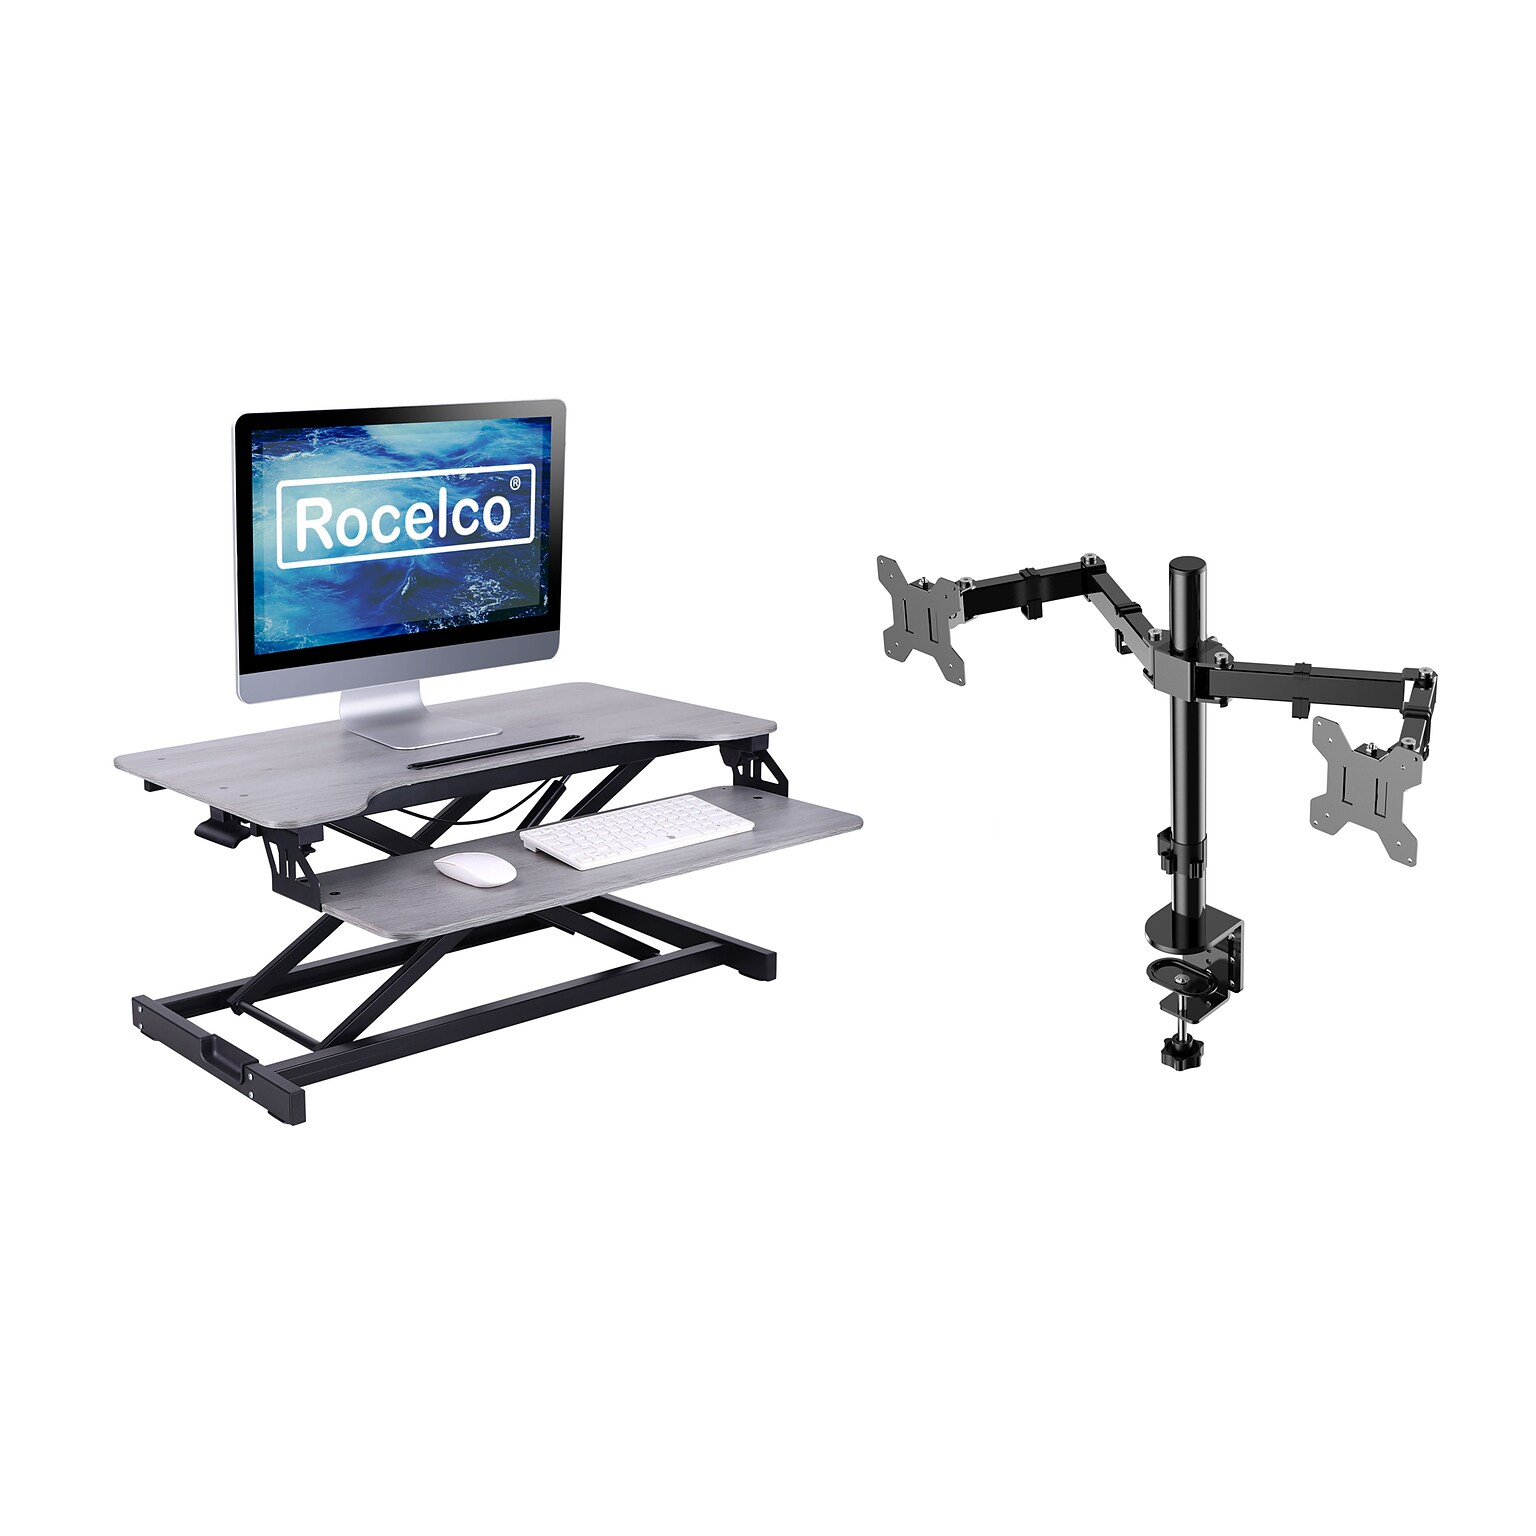 Rocelco 31.5W 4-20H Adjustable Steel Standing Desk Converter with Dual Monitor Mount, Gray (R VADRG-DM2)